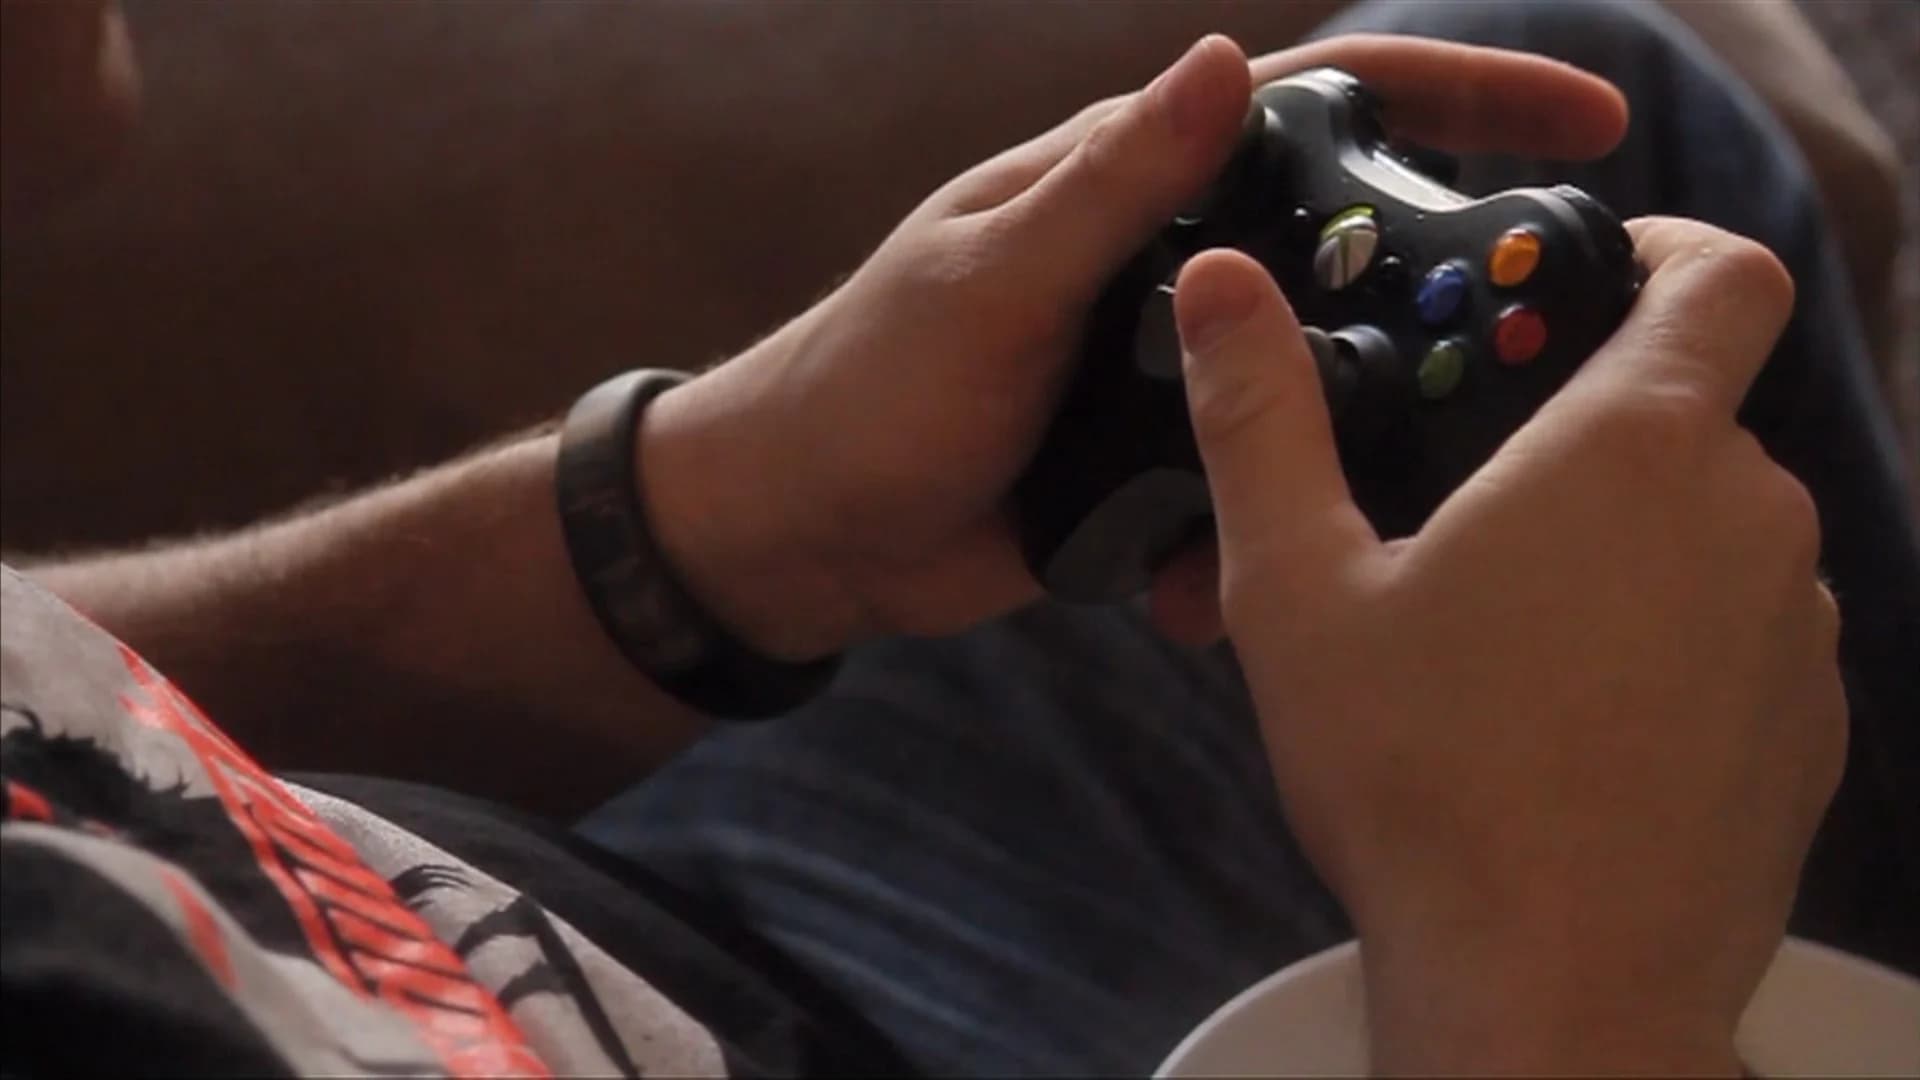 Video game addiction to be added to WHO list of diseases